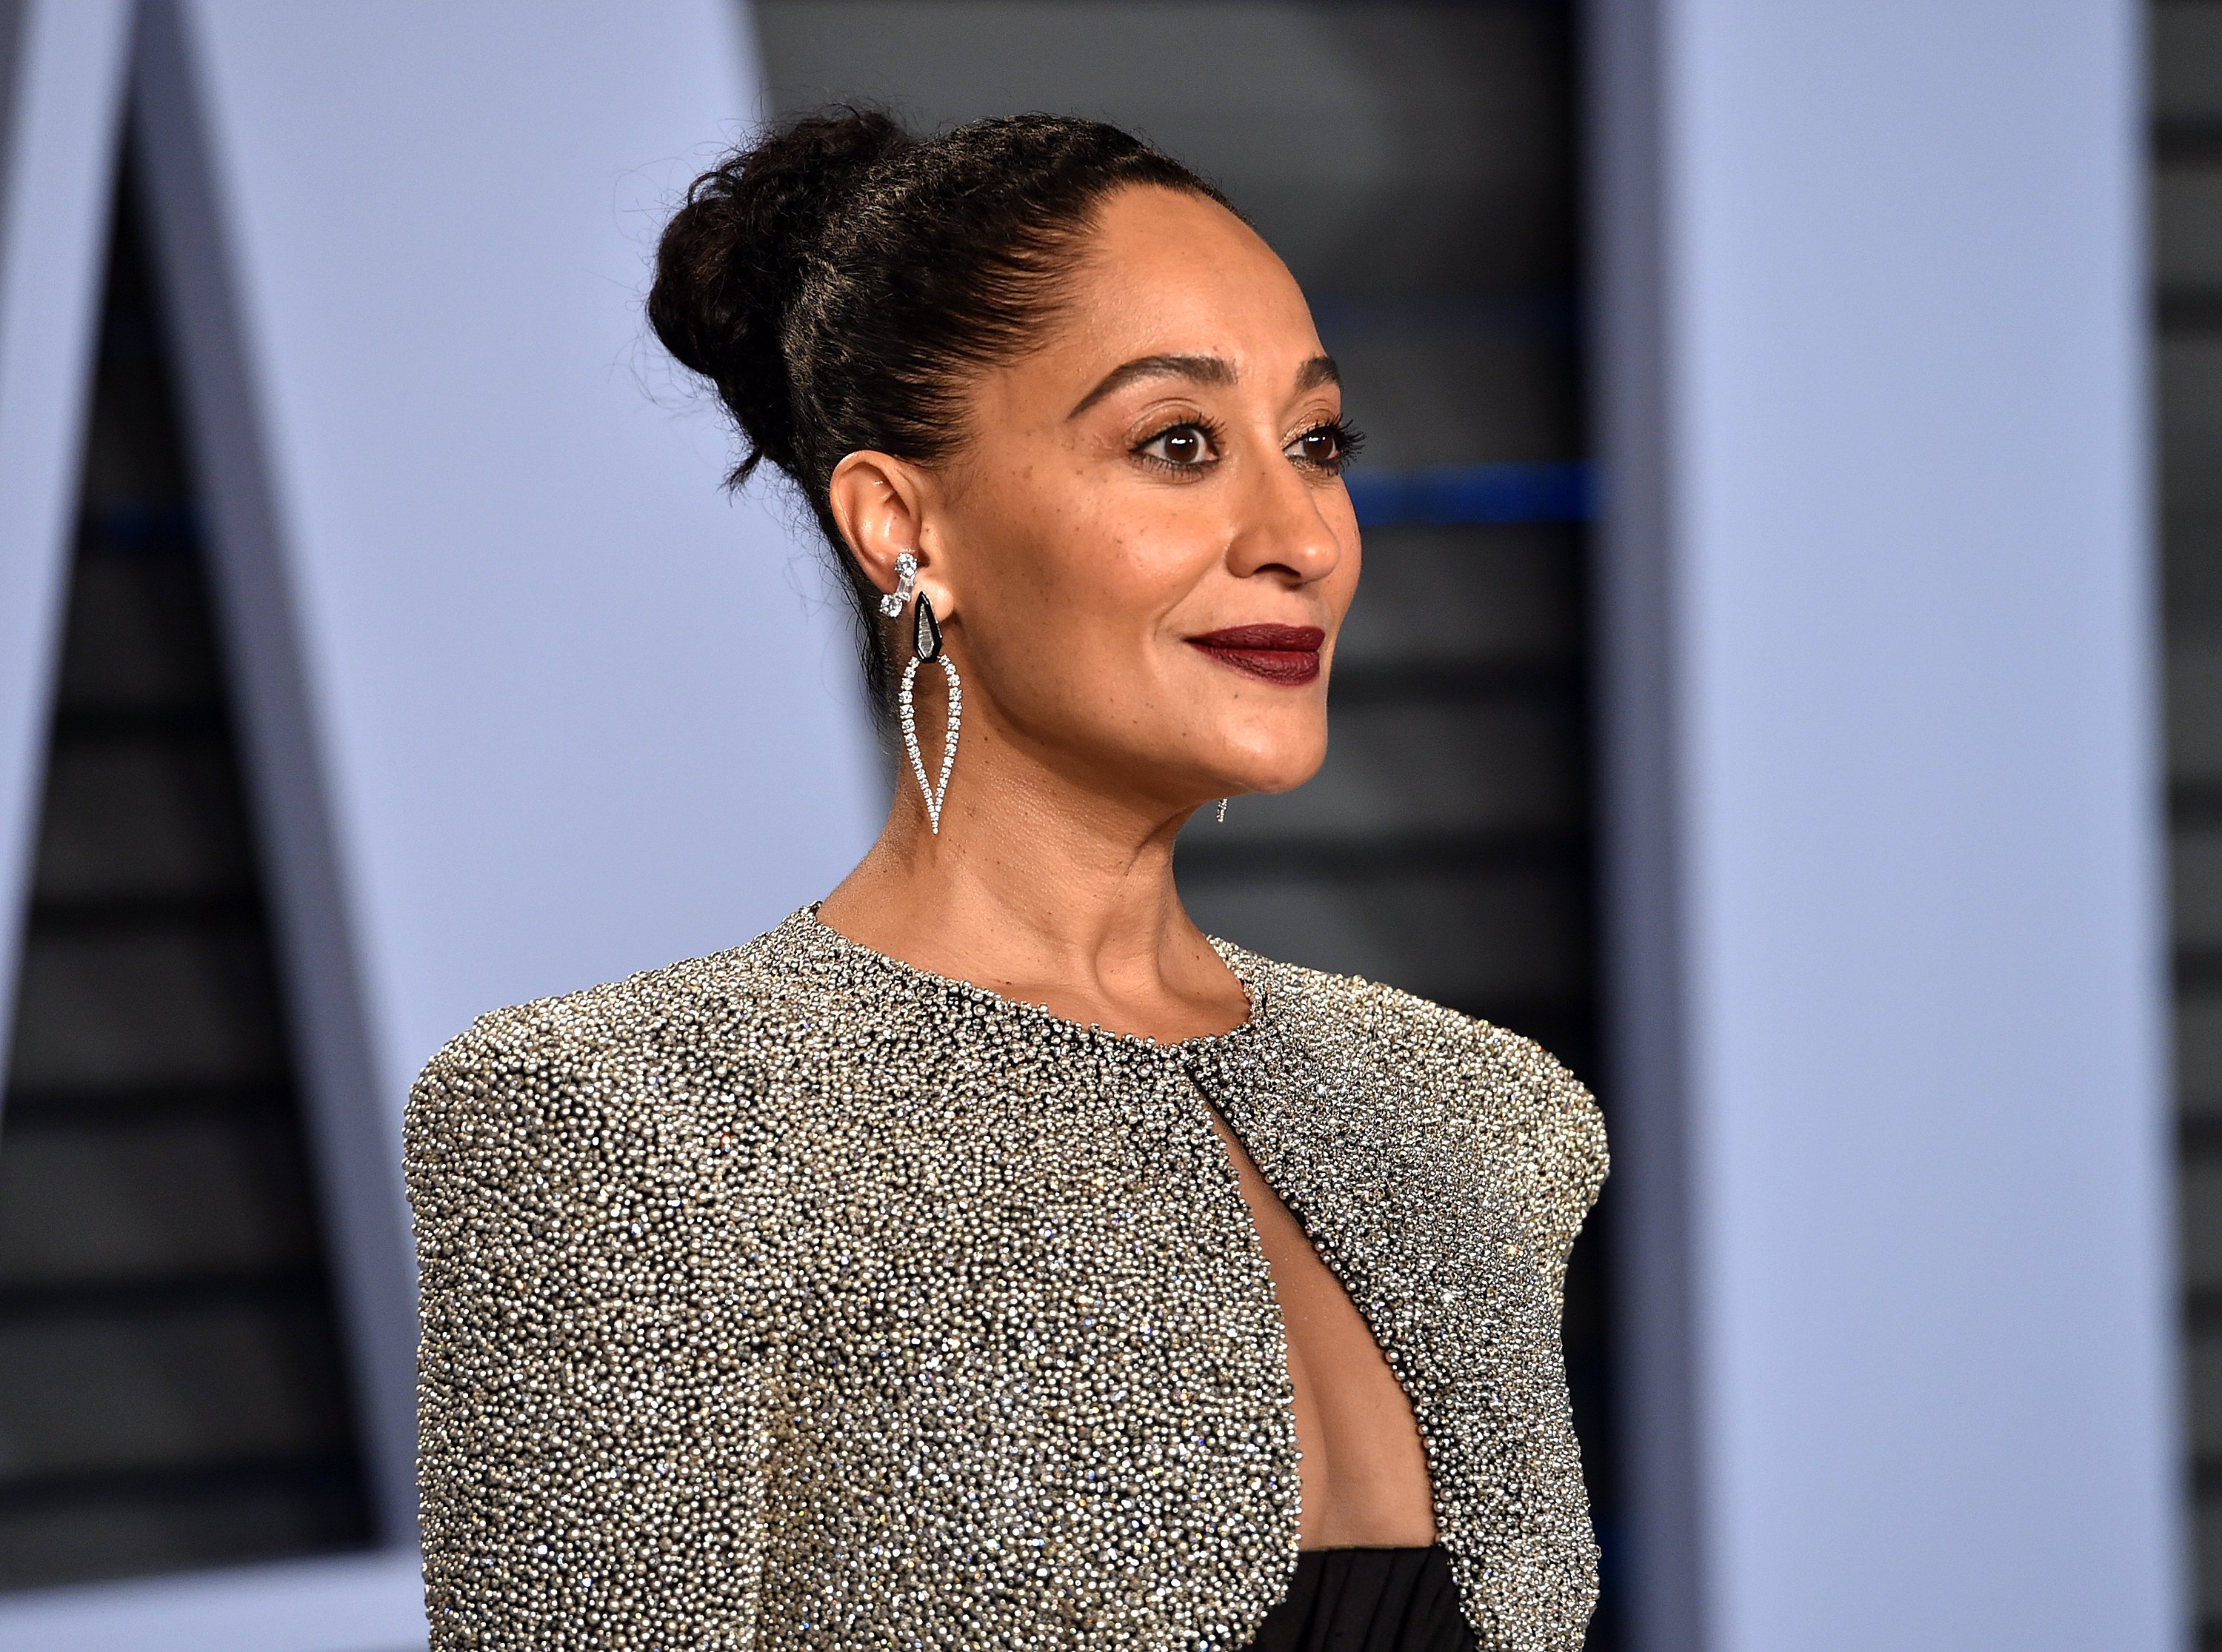 Tracee Ellis Ross at the 2018 Vanity Fair Oscars Party on March 4, 2018 in Beverly Hills, California. | Photo: Getty Images